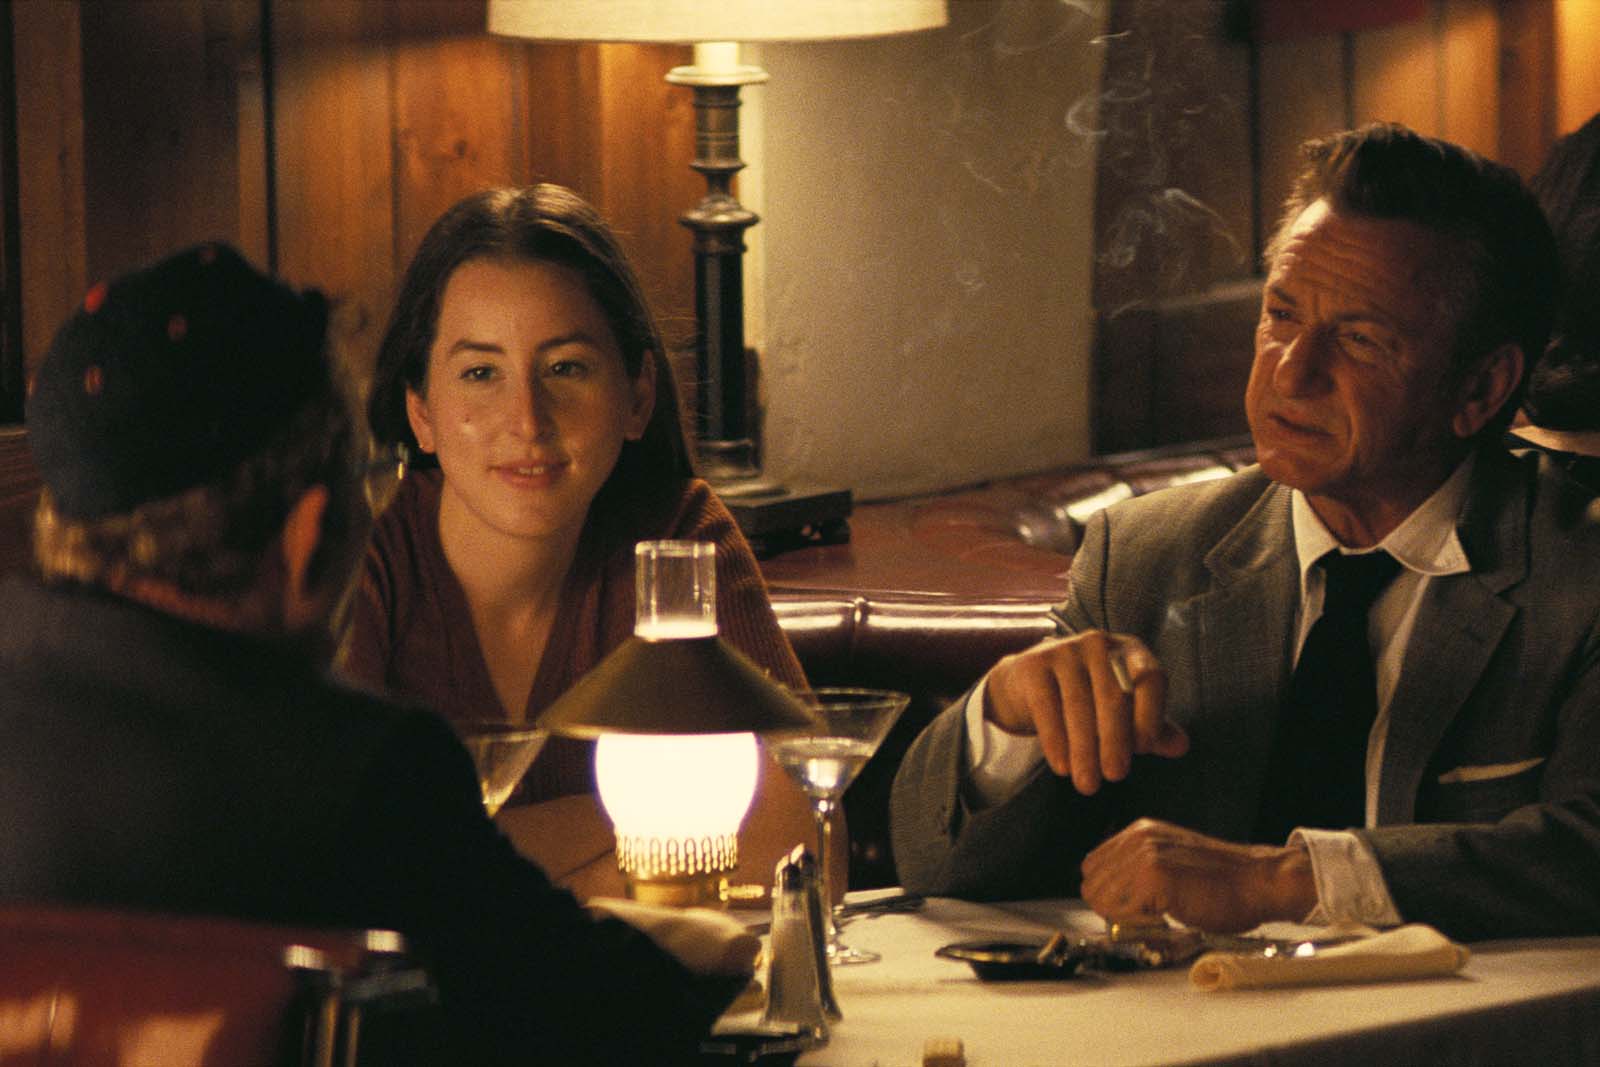 Alana at the restaurant with Jack Holden and Rex Blau (Tom Waits) in Licorice Pizza. Image © MGM Studios